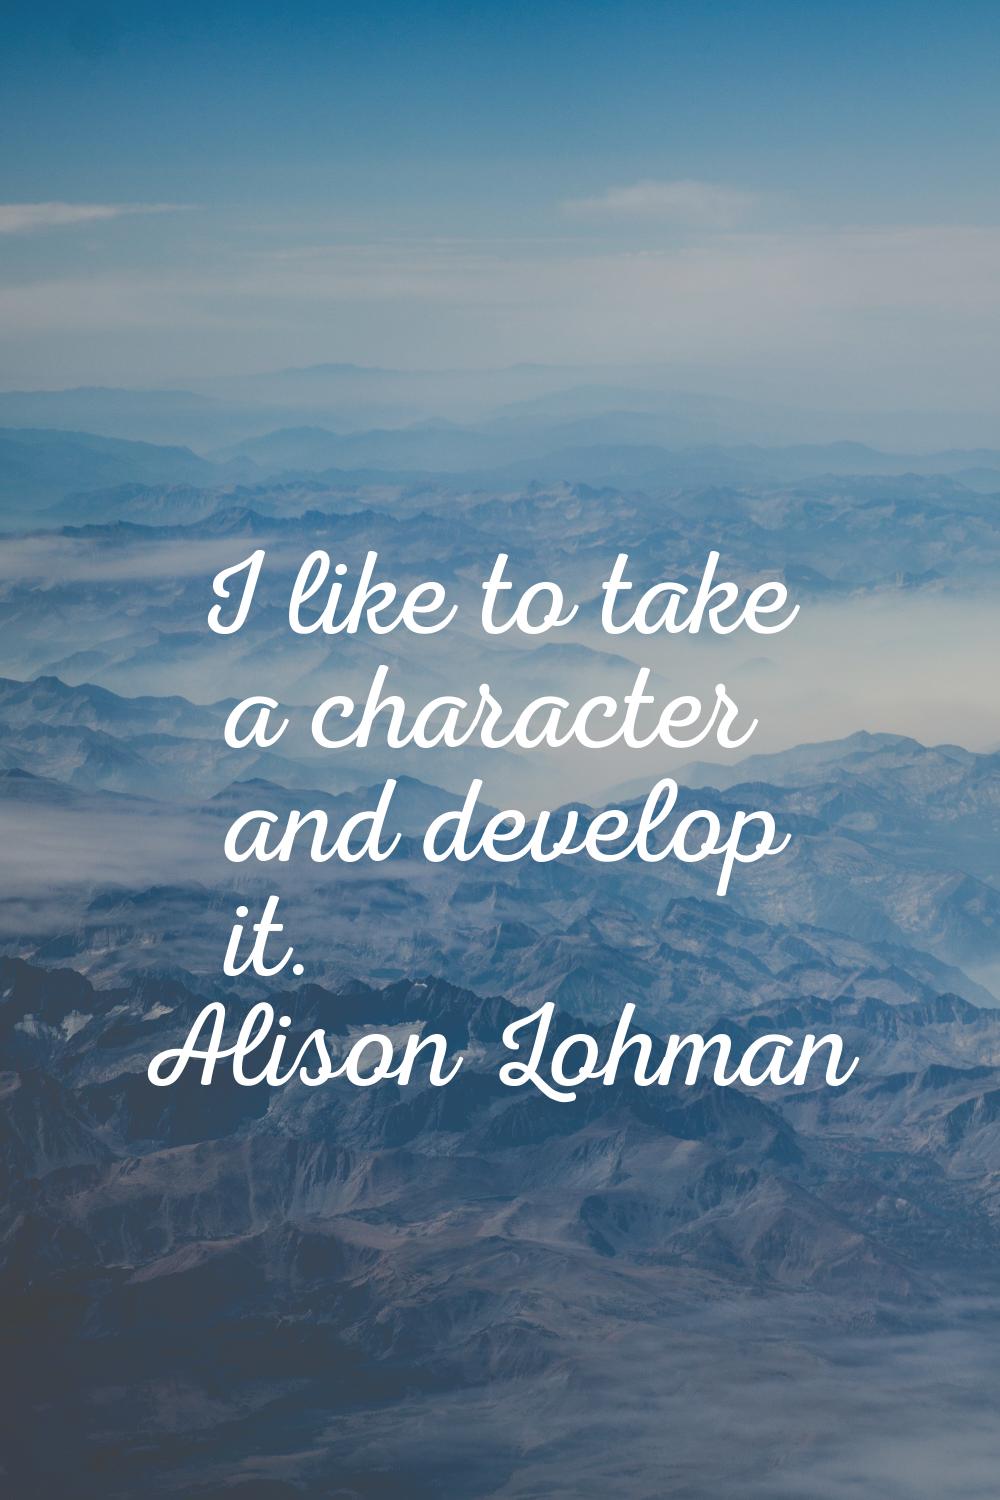 I like to take a character and develop it.